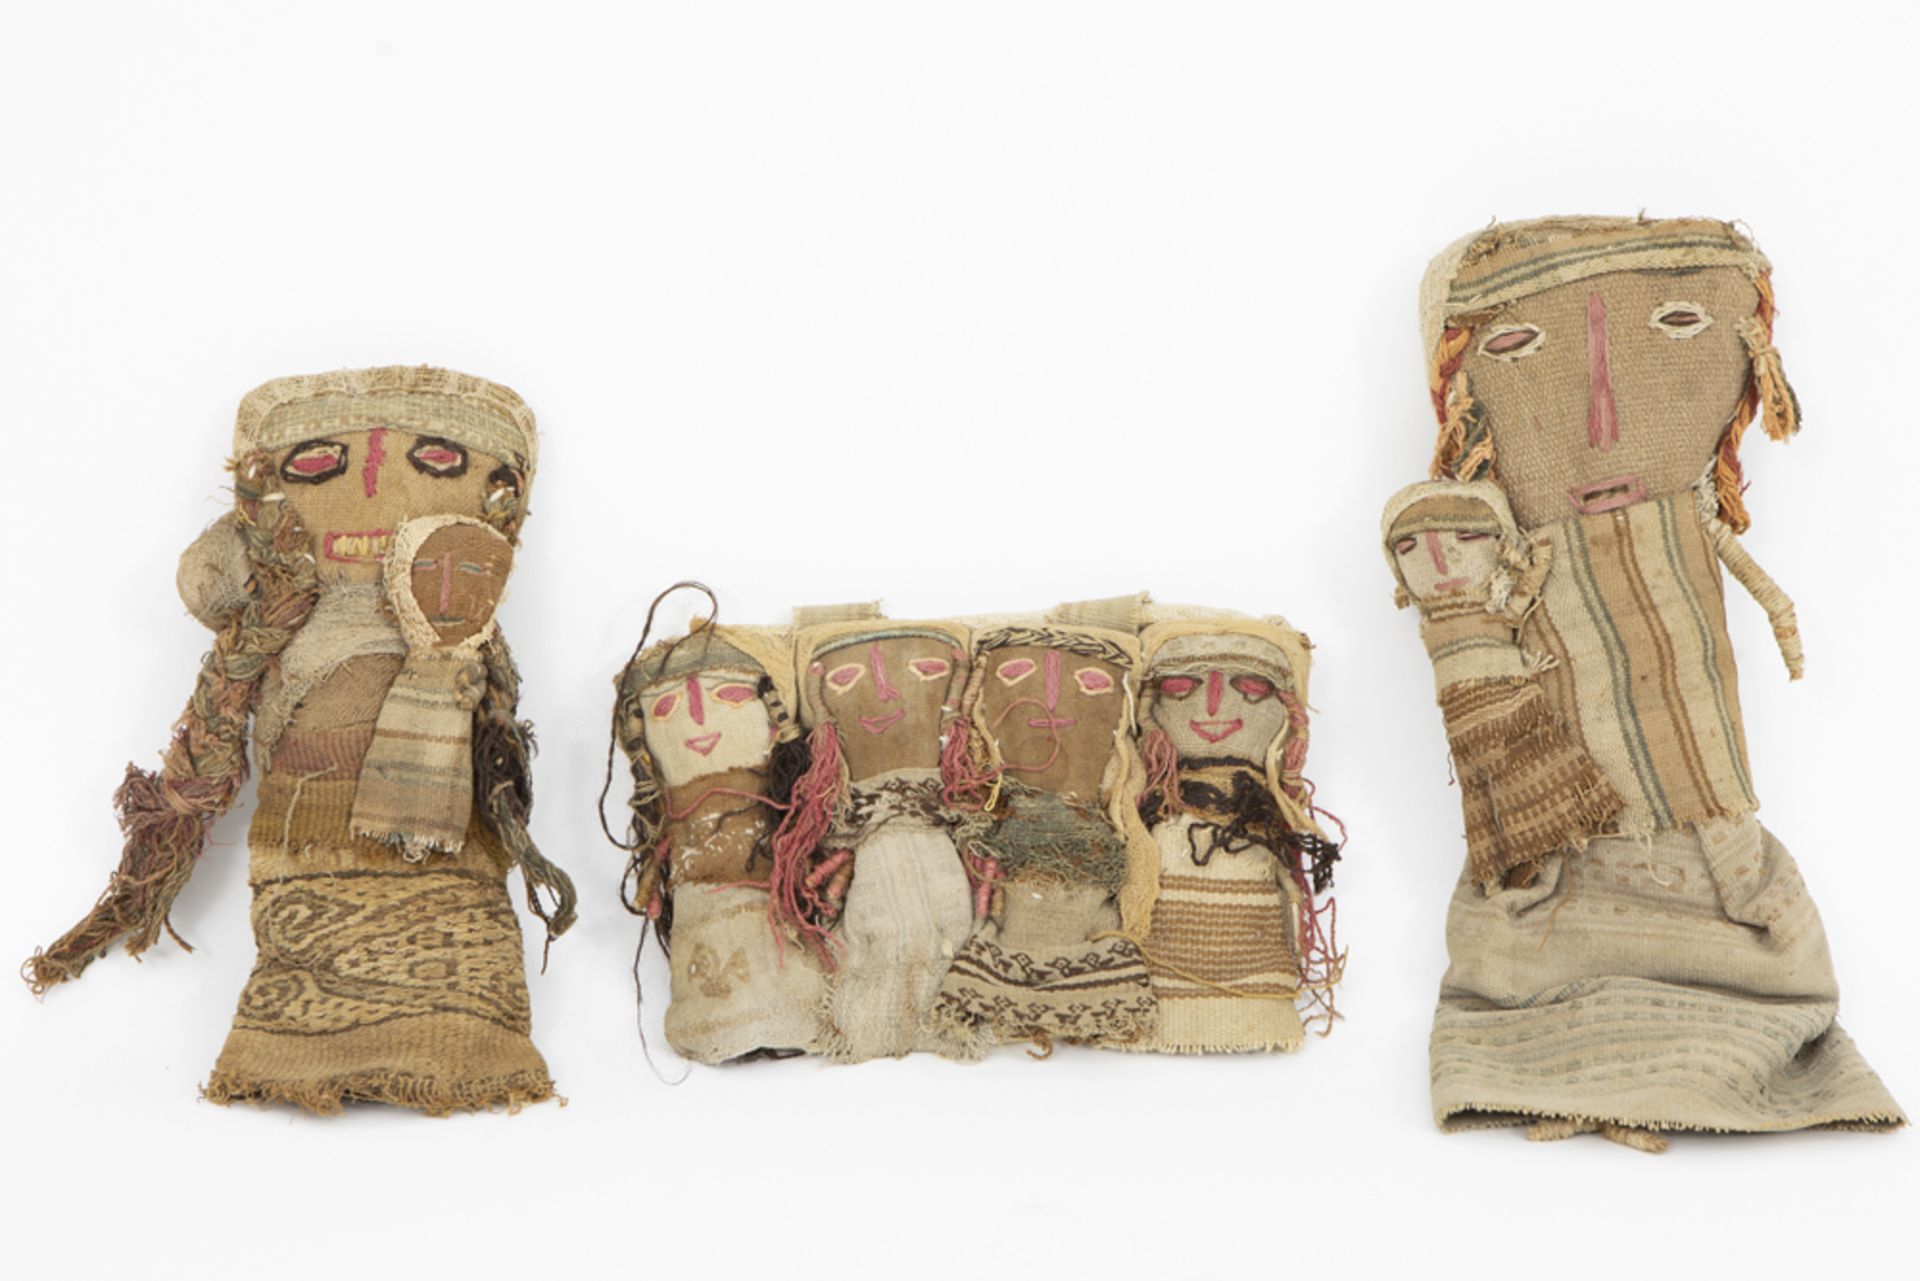 two Chancay area funerary dolls and a bag with dolls from the central coast valleys of Peru ||